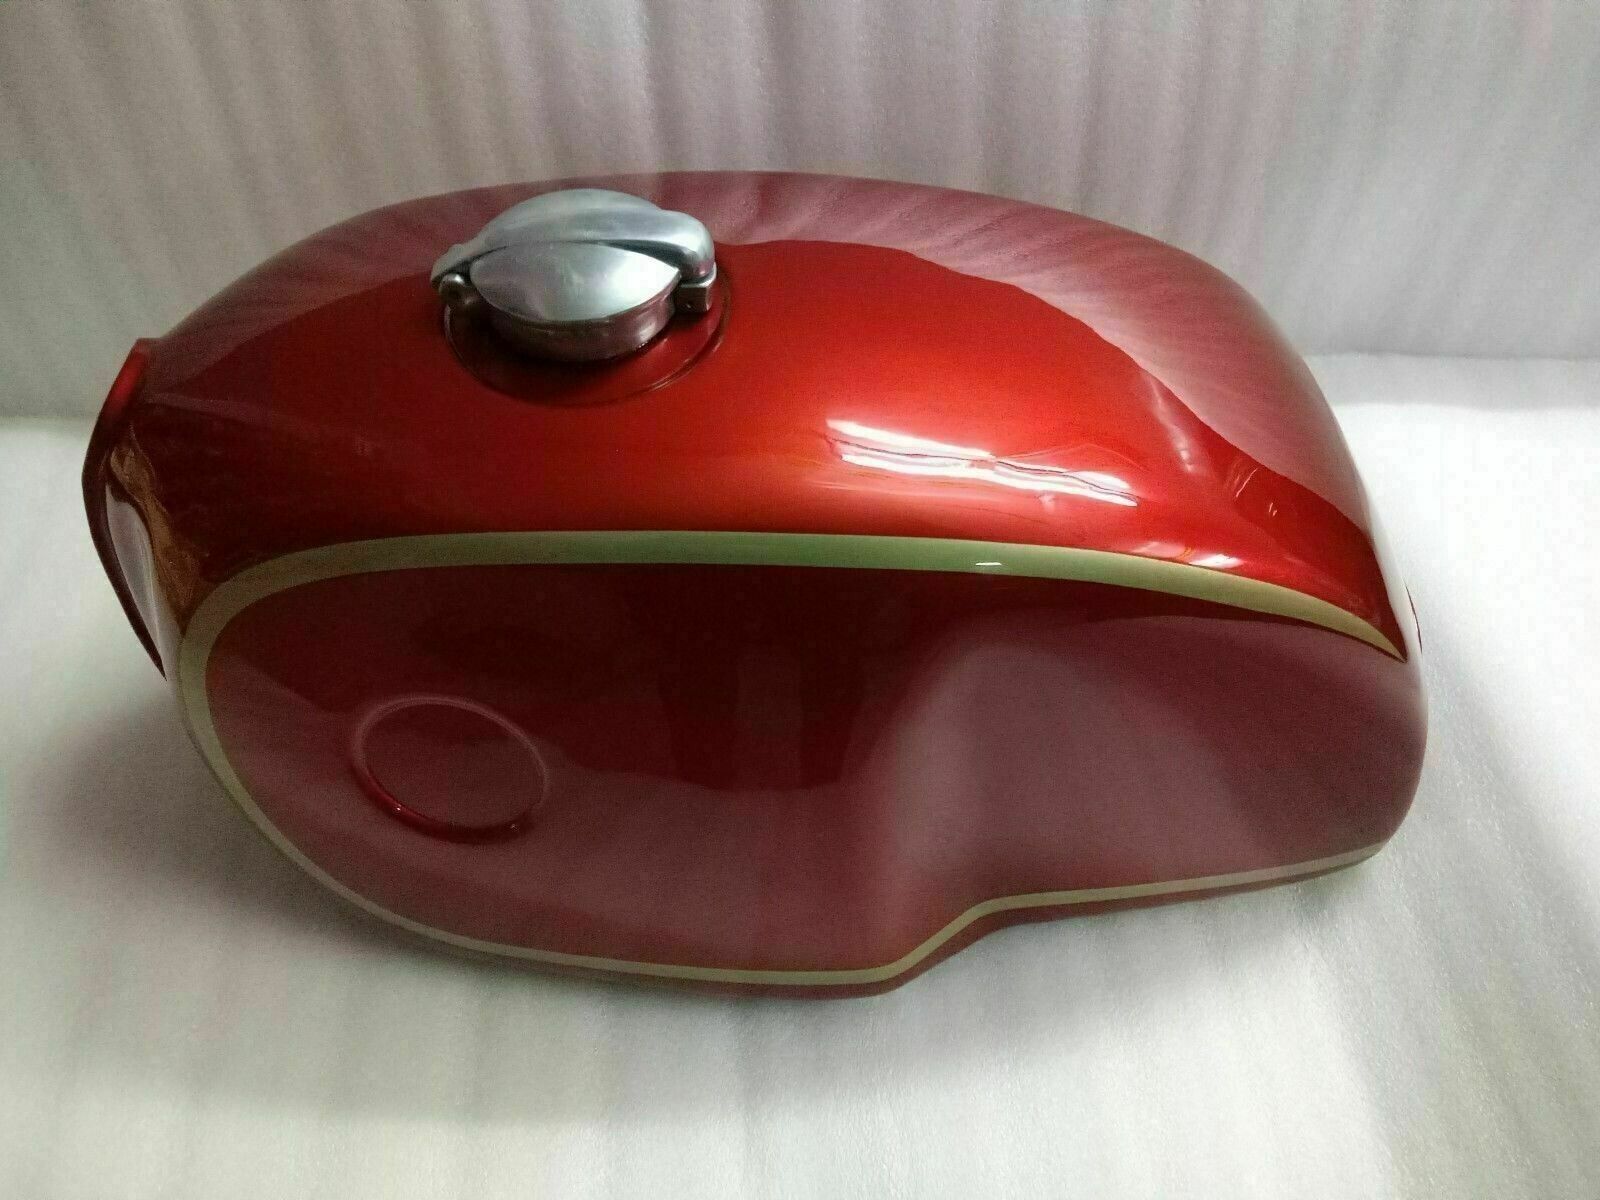 BMW R100 RT RS R90 R80 R75 CHERRY PAINTED STEEL PETROL FUEL GAS TANK |Fit For